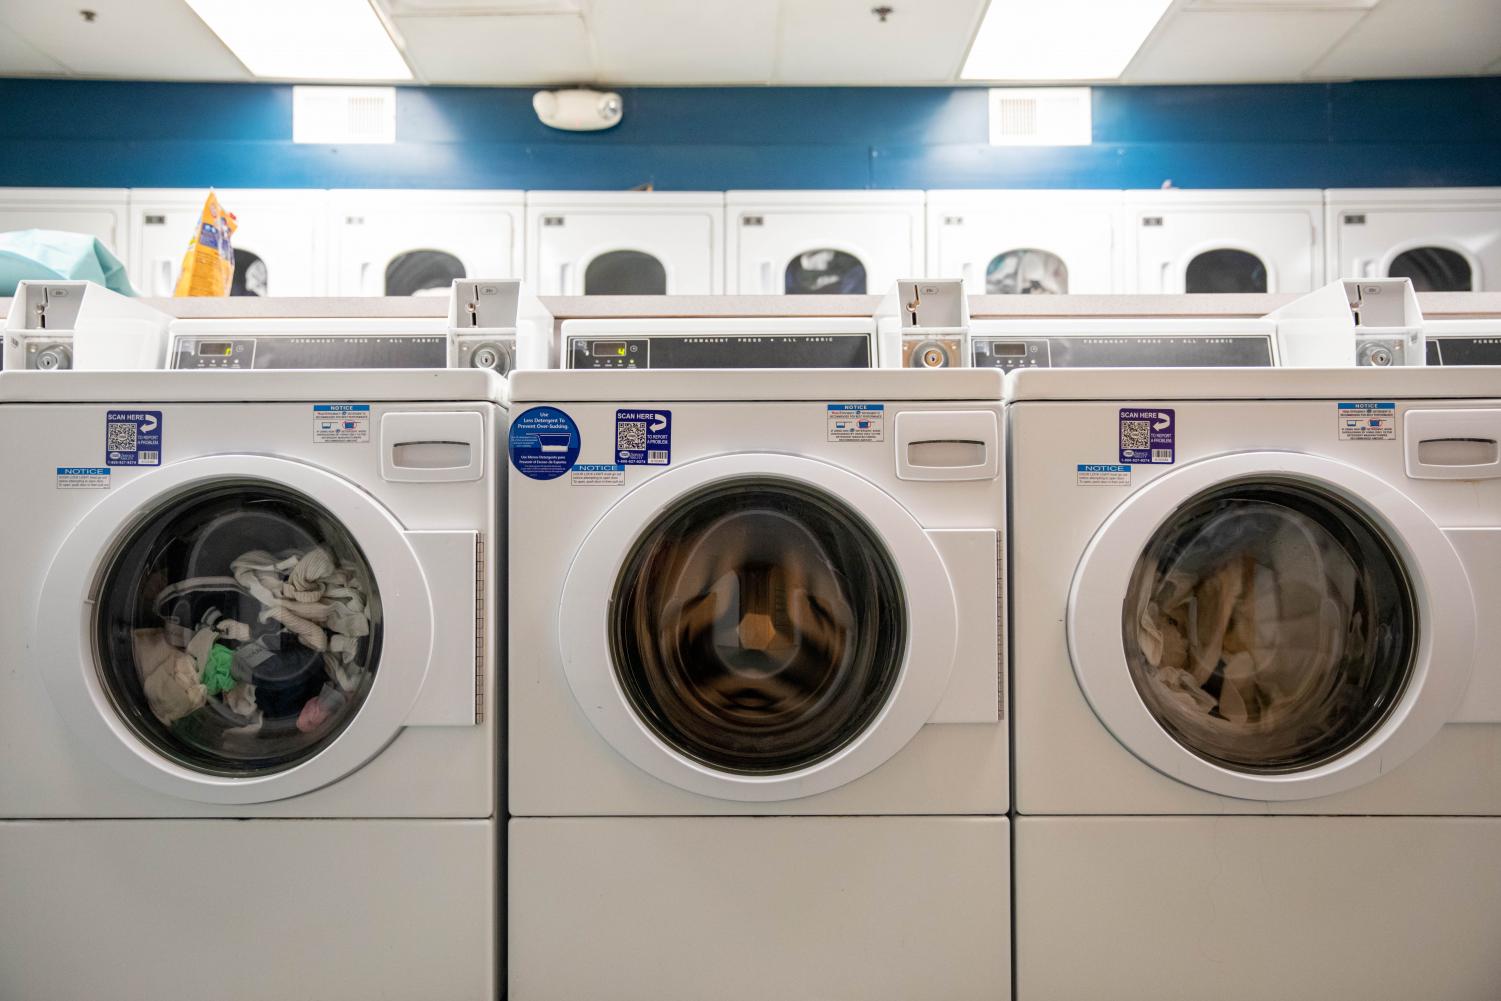 Washing machines in the Lewis laundry room. (Photo by Emily Gonçalves)